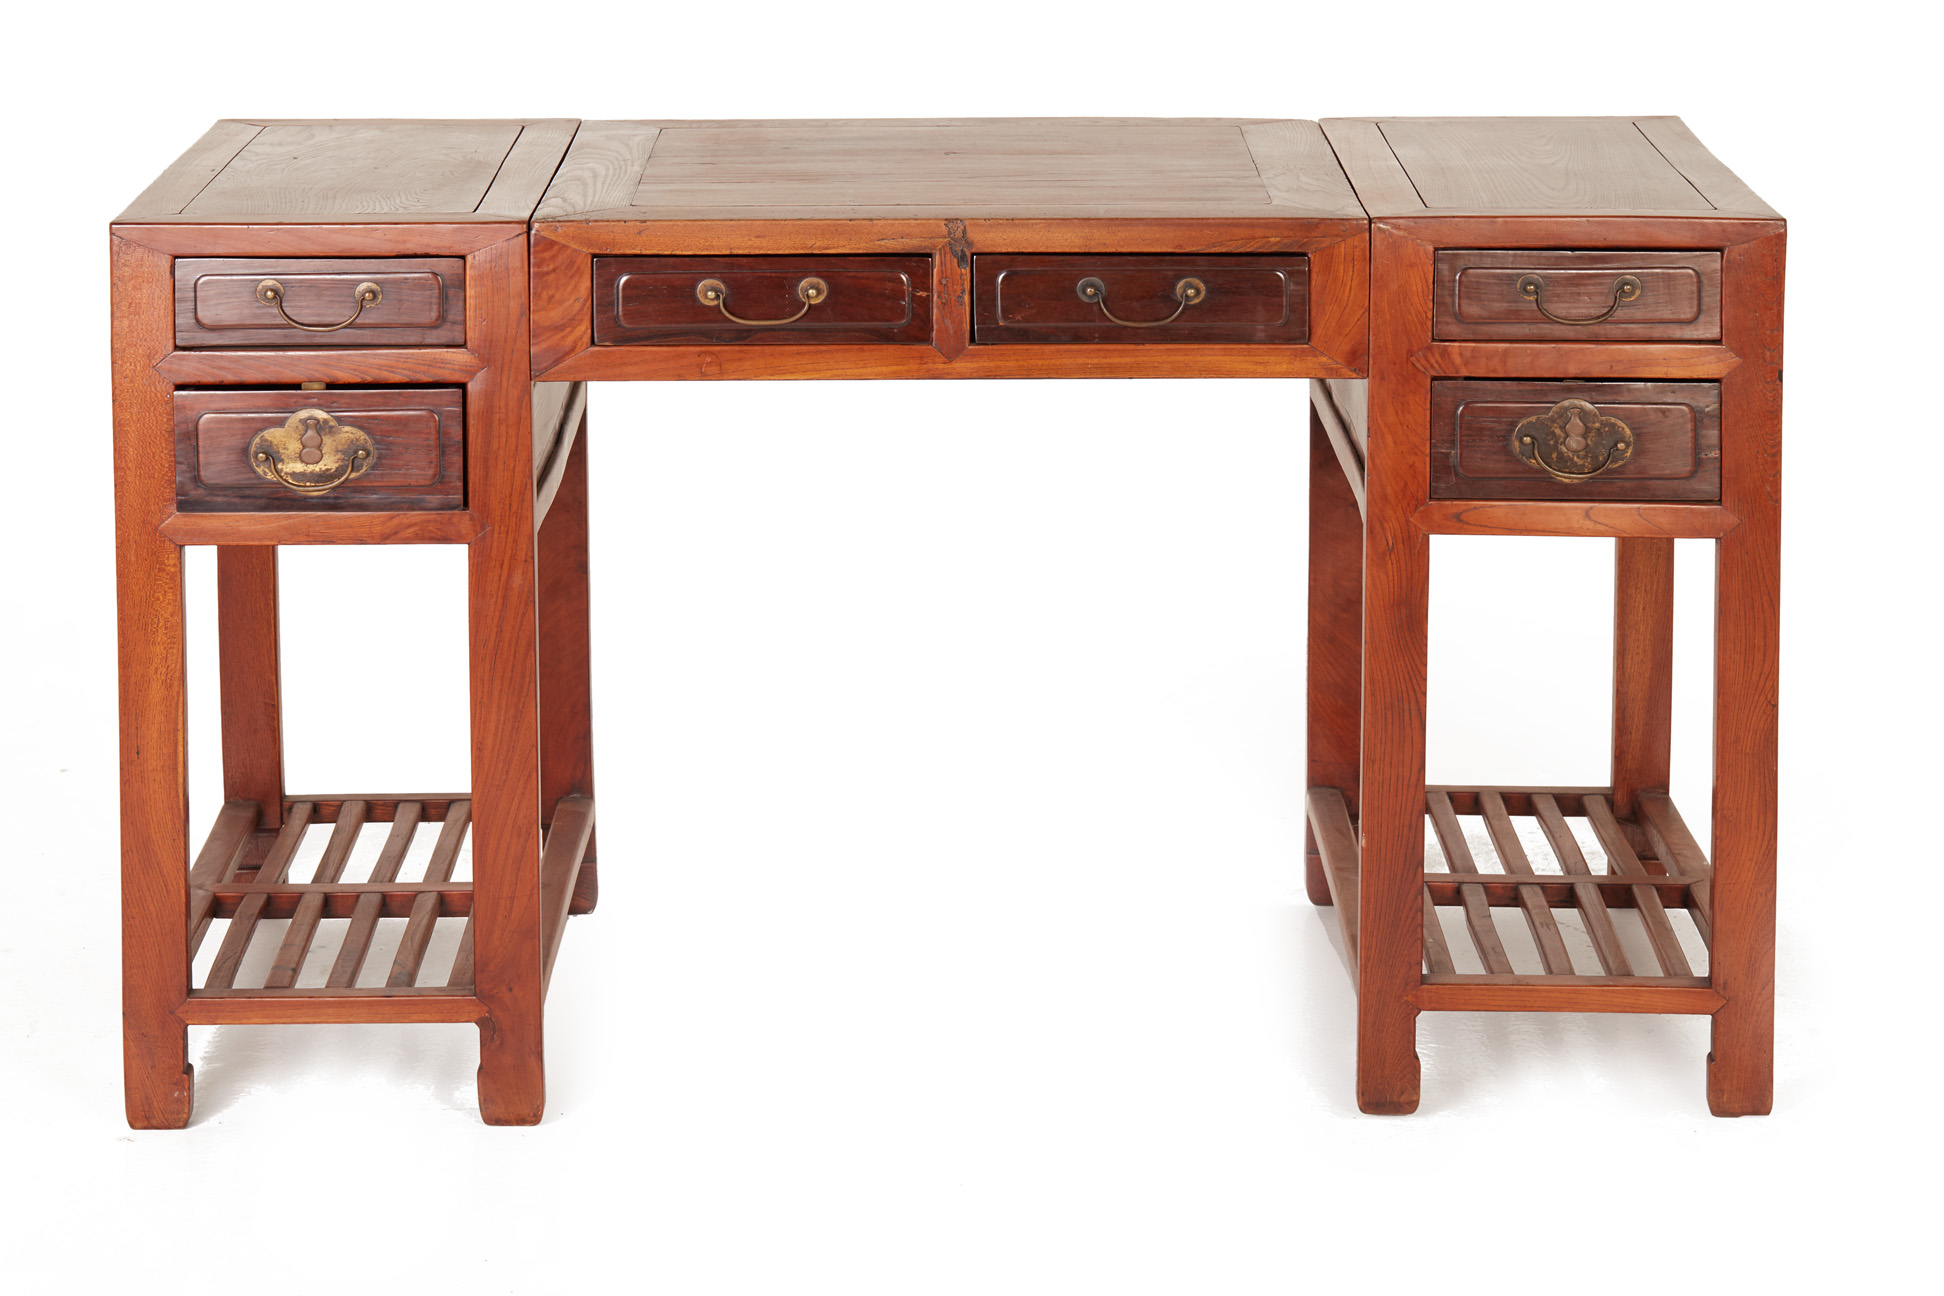 AN ANTIQUE CHINESE ELM AND BLACKWOOD TWIN PEDESTAL DESK